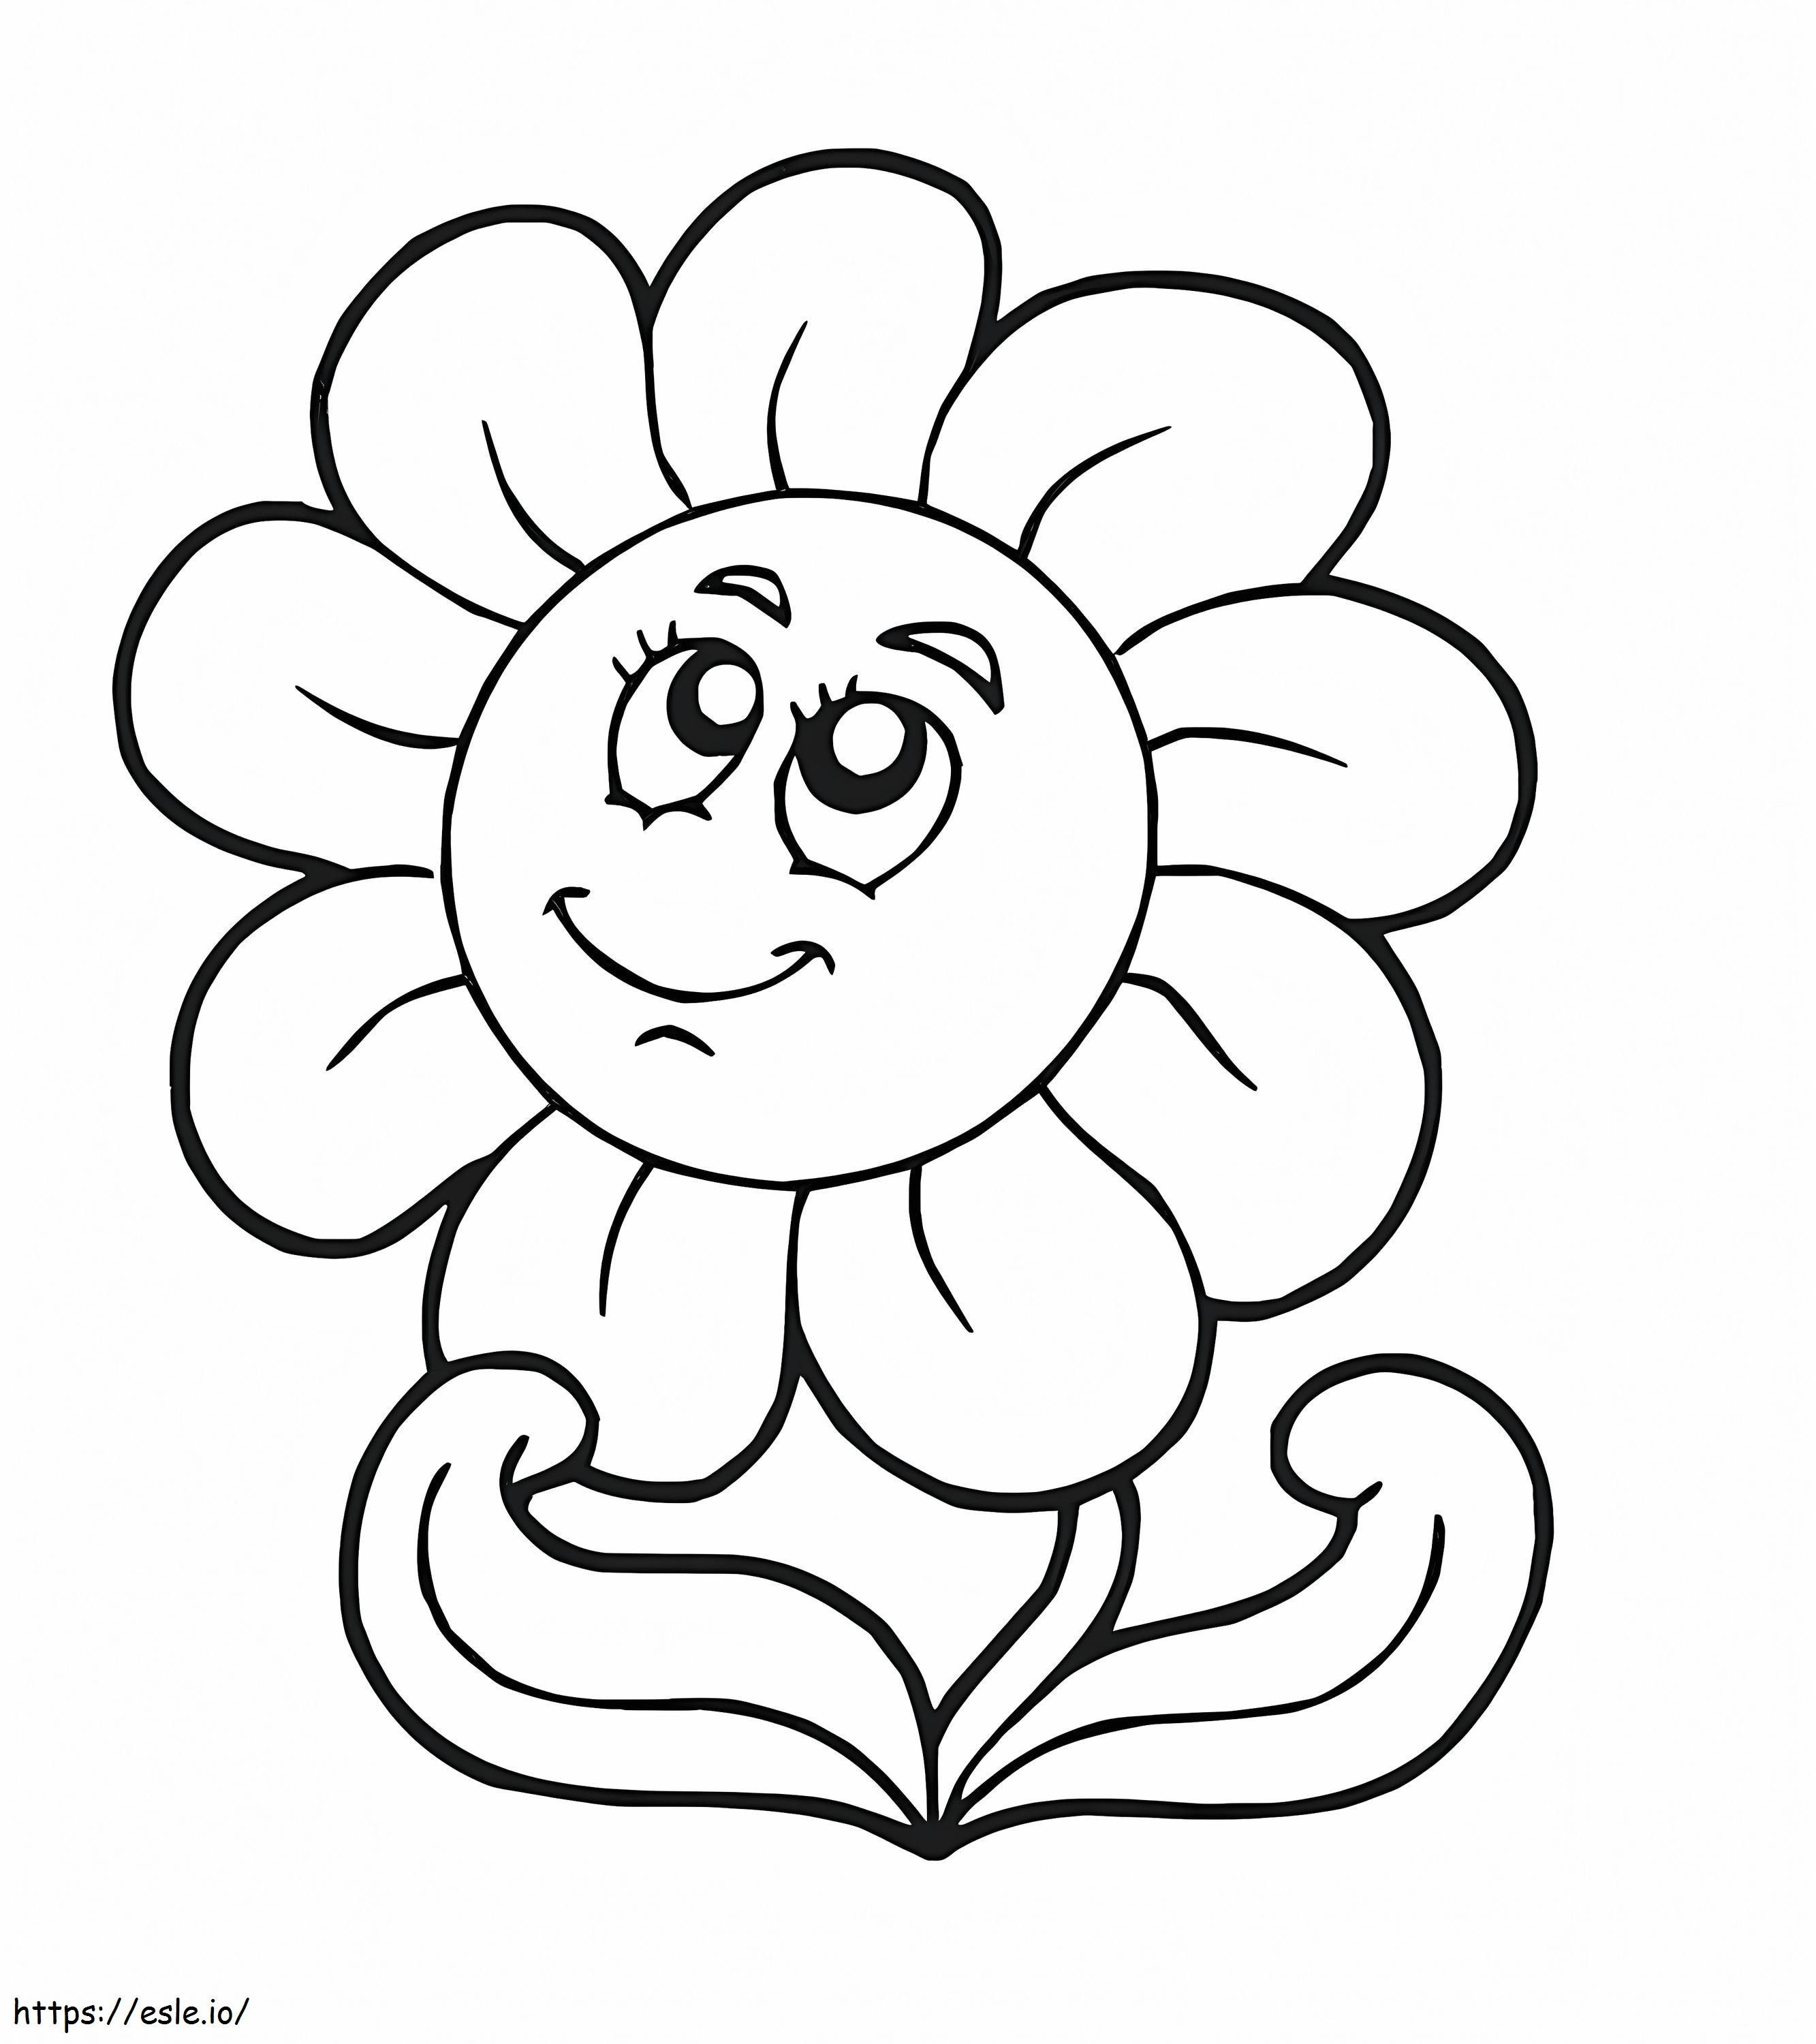 Sunflower Cartoon Smiling coloring page